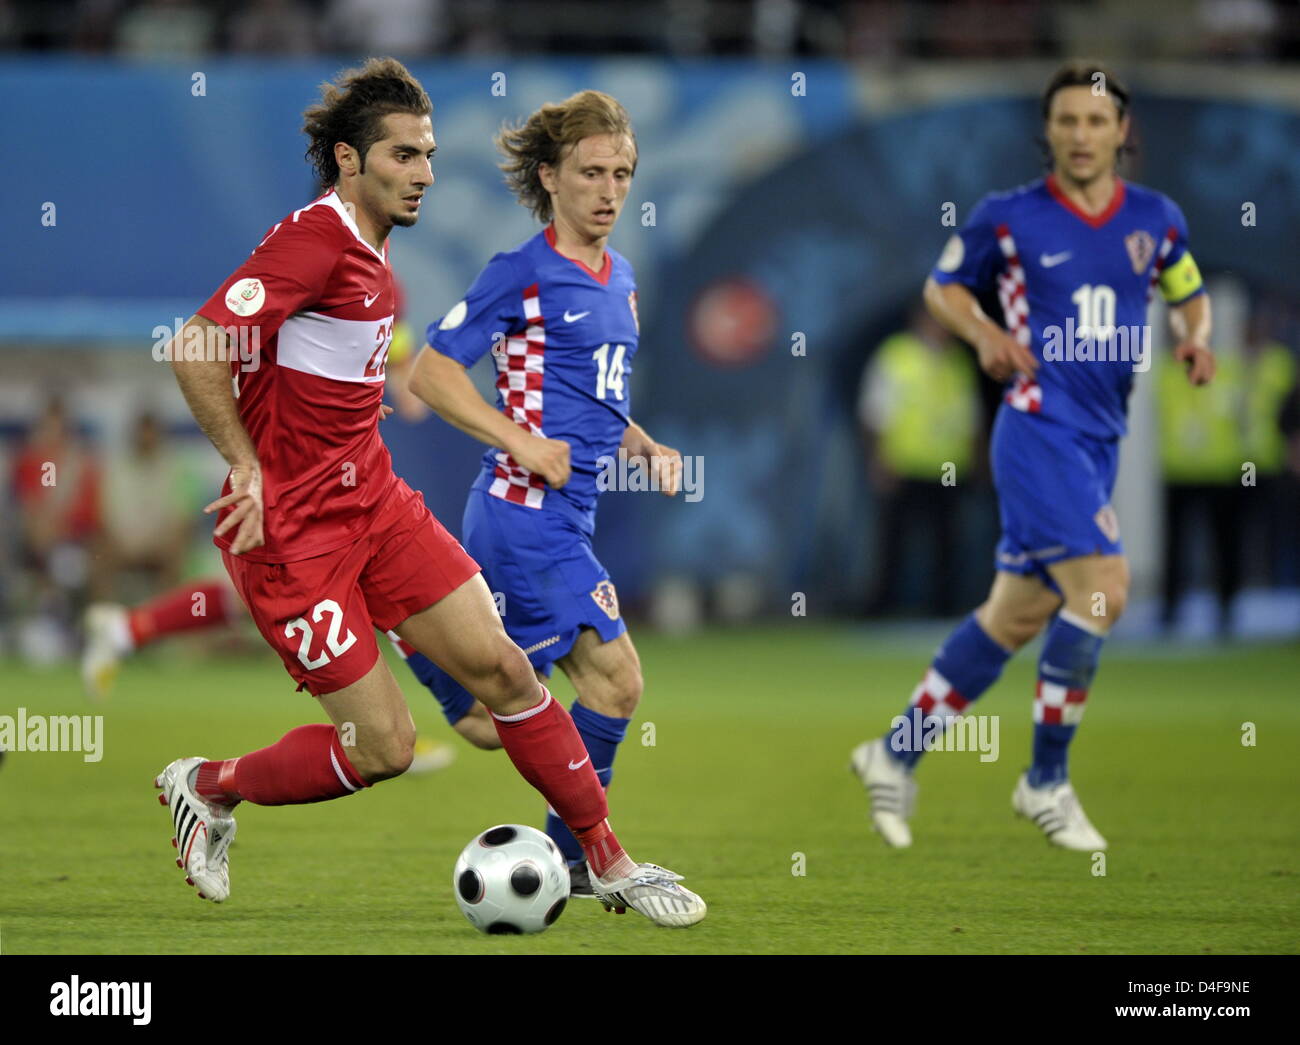 Luca Modric (C) and Robert Kovac (R) of Croatia vie with Hamit Altintop (L) of Turkey during the UEFA EURO 2008 quarter final match between Croatia and Turkey at the Ernst Happel stadium in Vienna, Austria, 20 June 2008. Photo: Achim Scheidemann dpa +please note UEFA restrictions particulary in regard to slide shows and 'No Mobile Services'+ +++(c) dpa - Bildfunk+++ Stock Photo